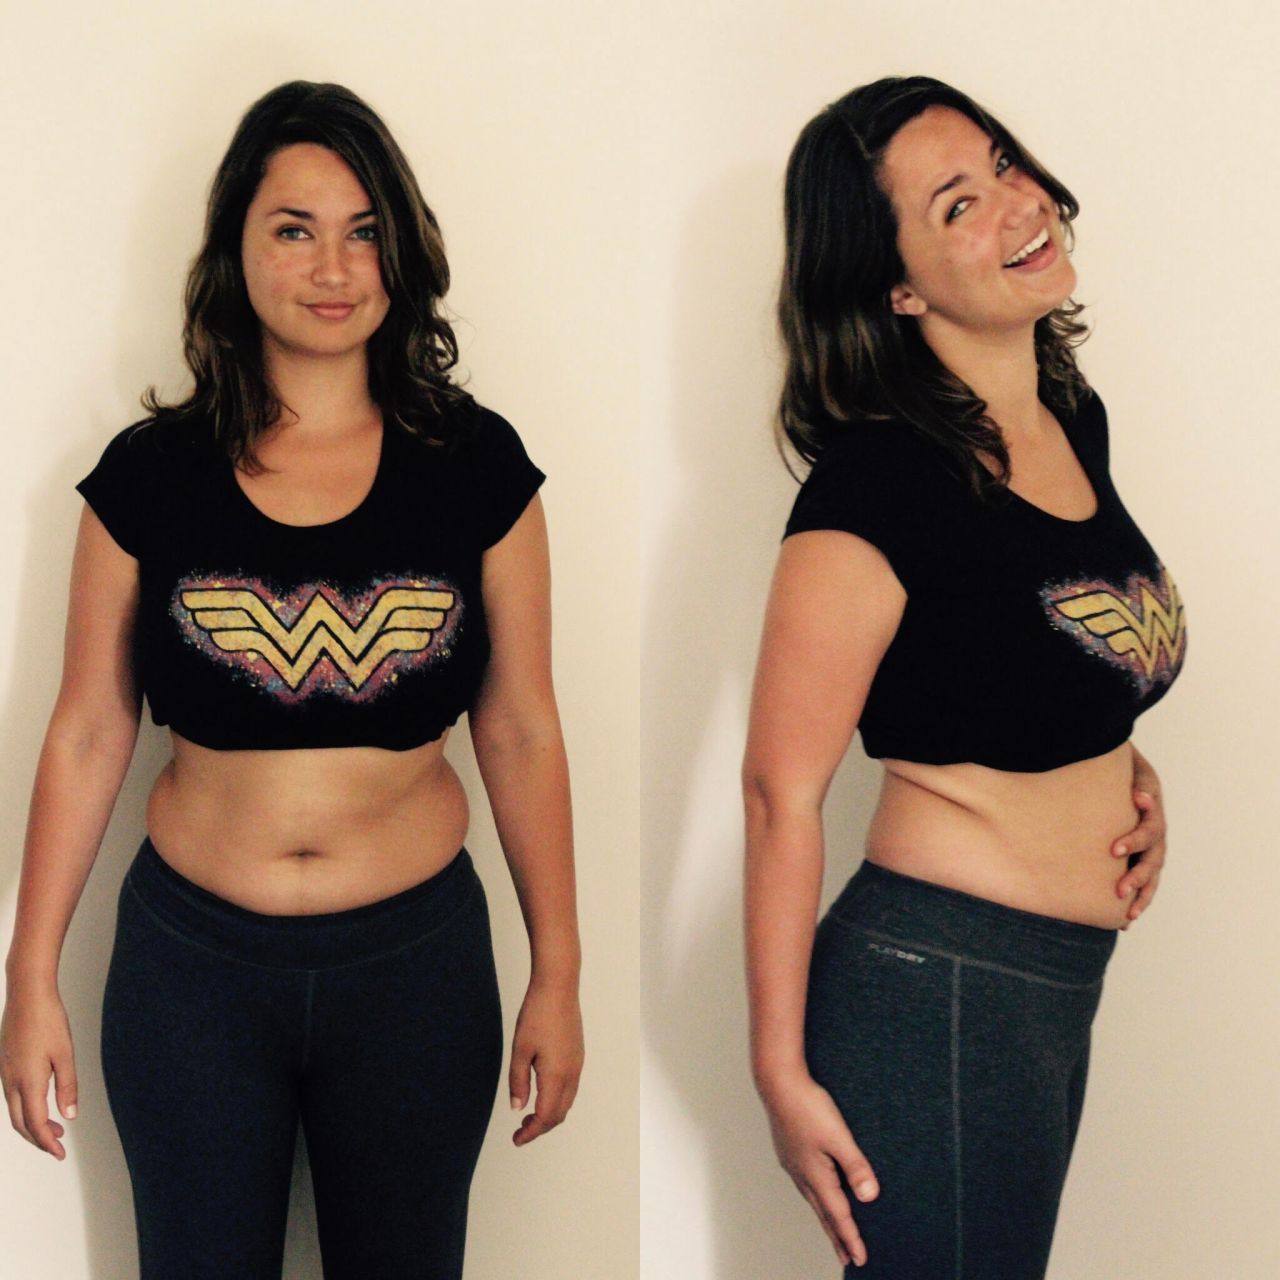 Couch Potato To Wonder Woman: What I Learned In My Year As A Fitness Noob